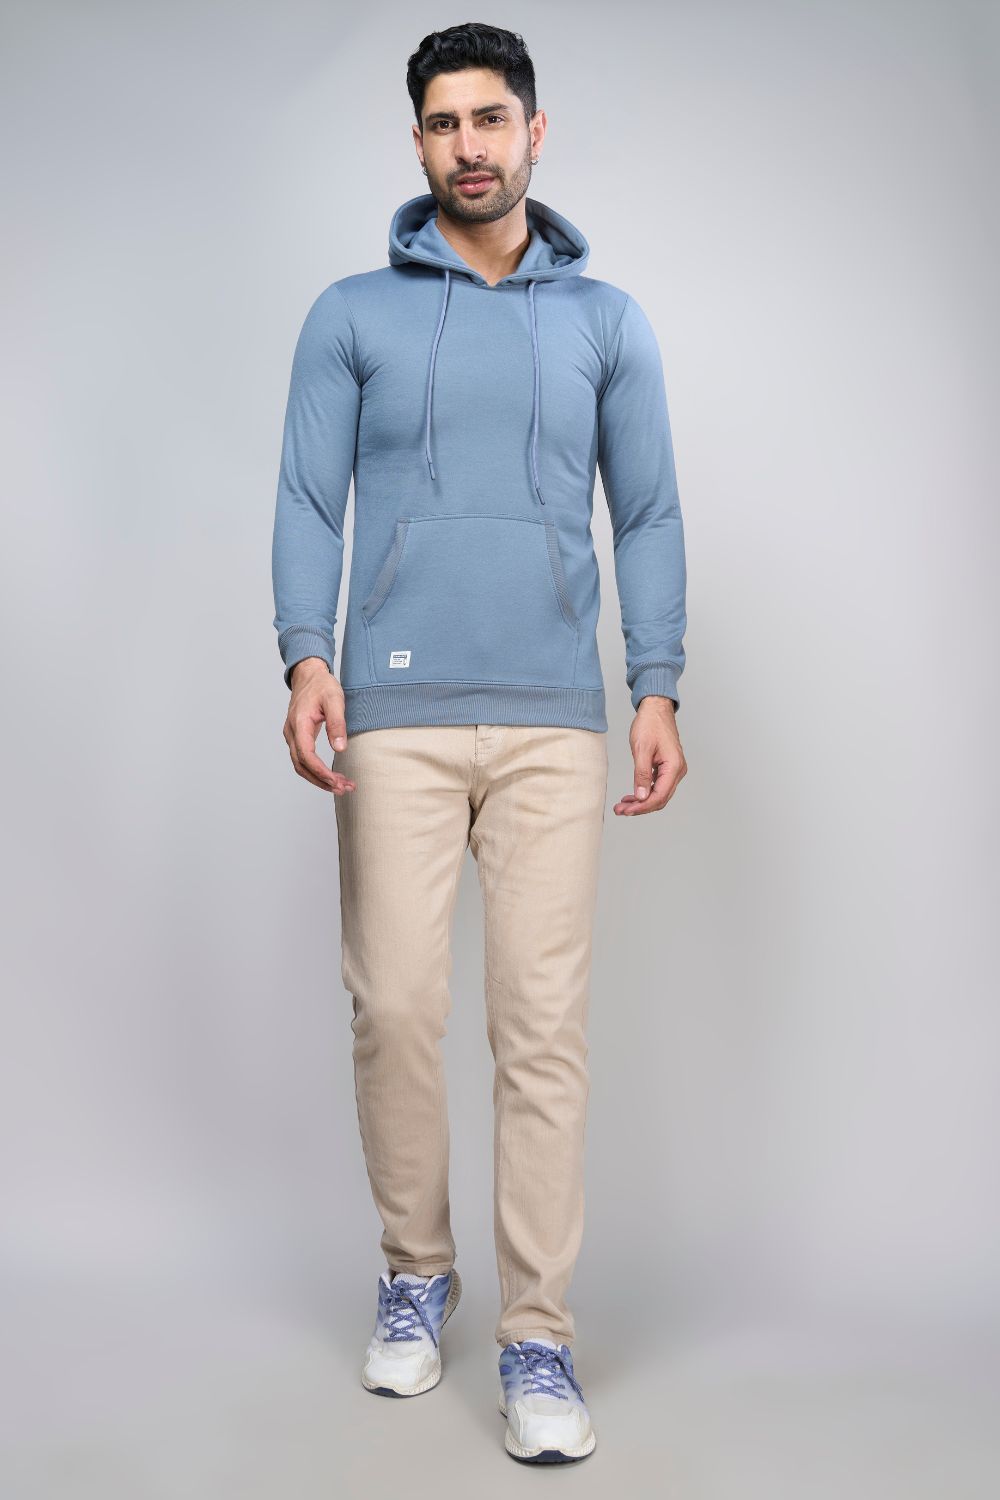 Niagara colored, hoodie for men with full sleeves and relaxed fit, front view.